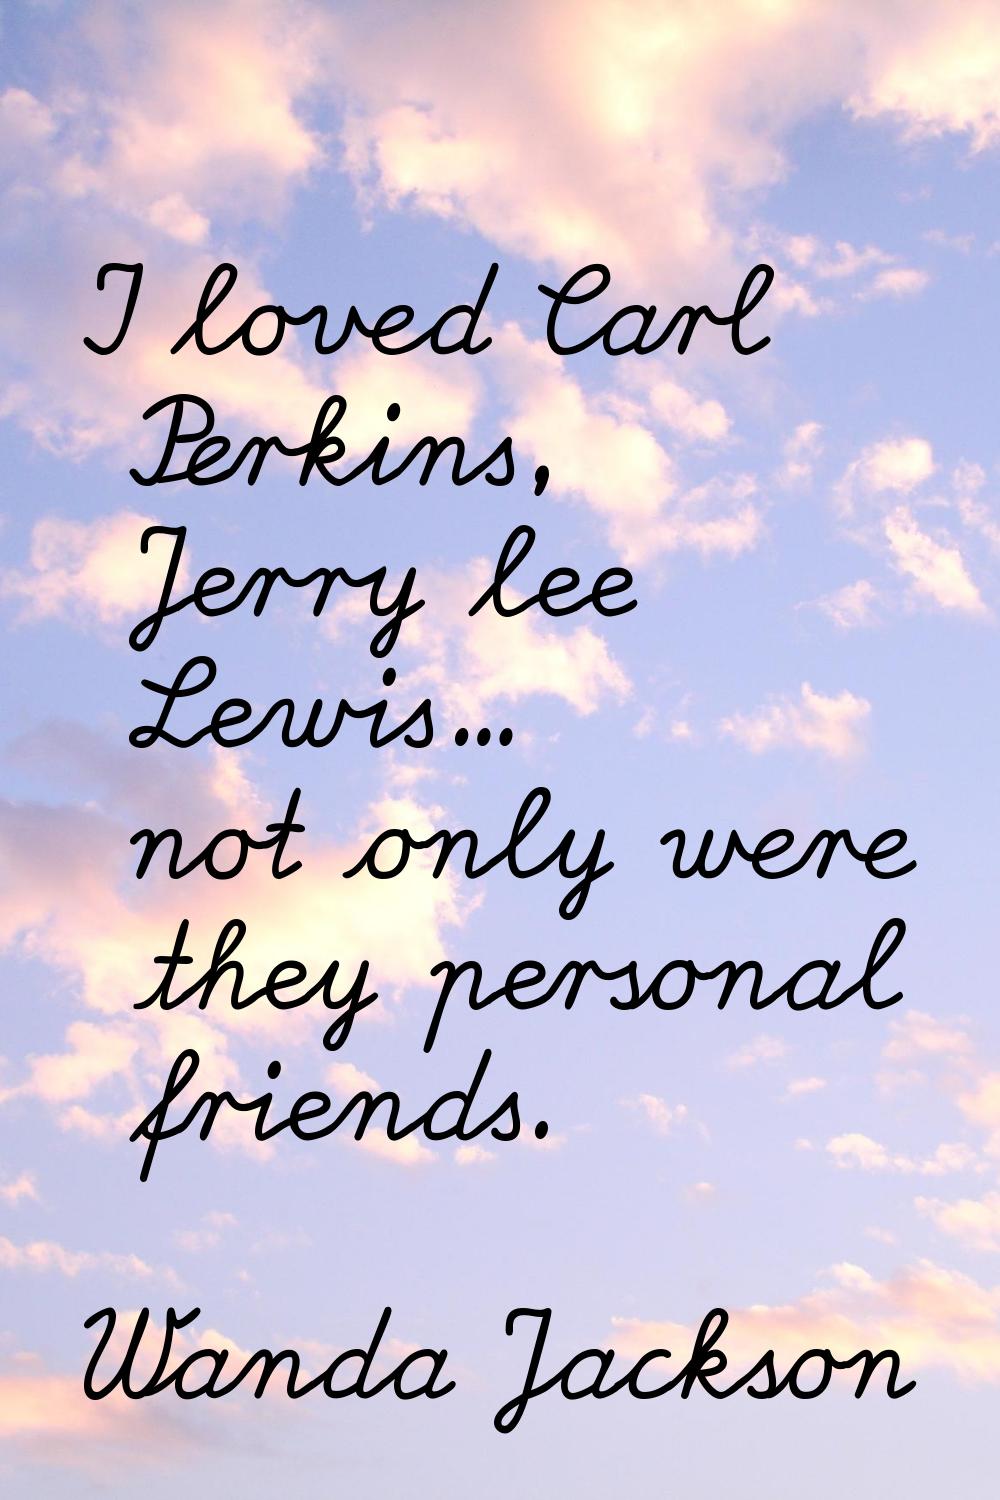 I loved Carl Perkins, Jerry lee Lewis... not only were they personal friends.